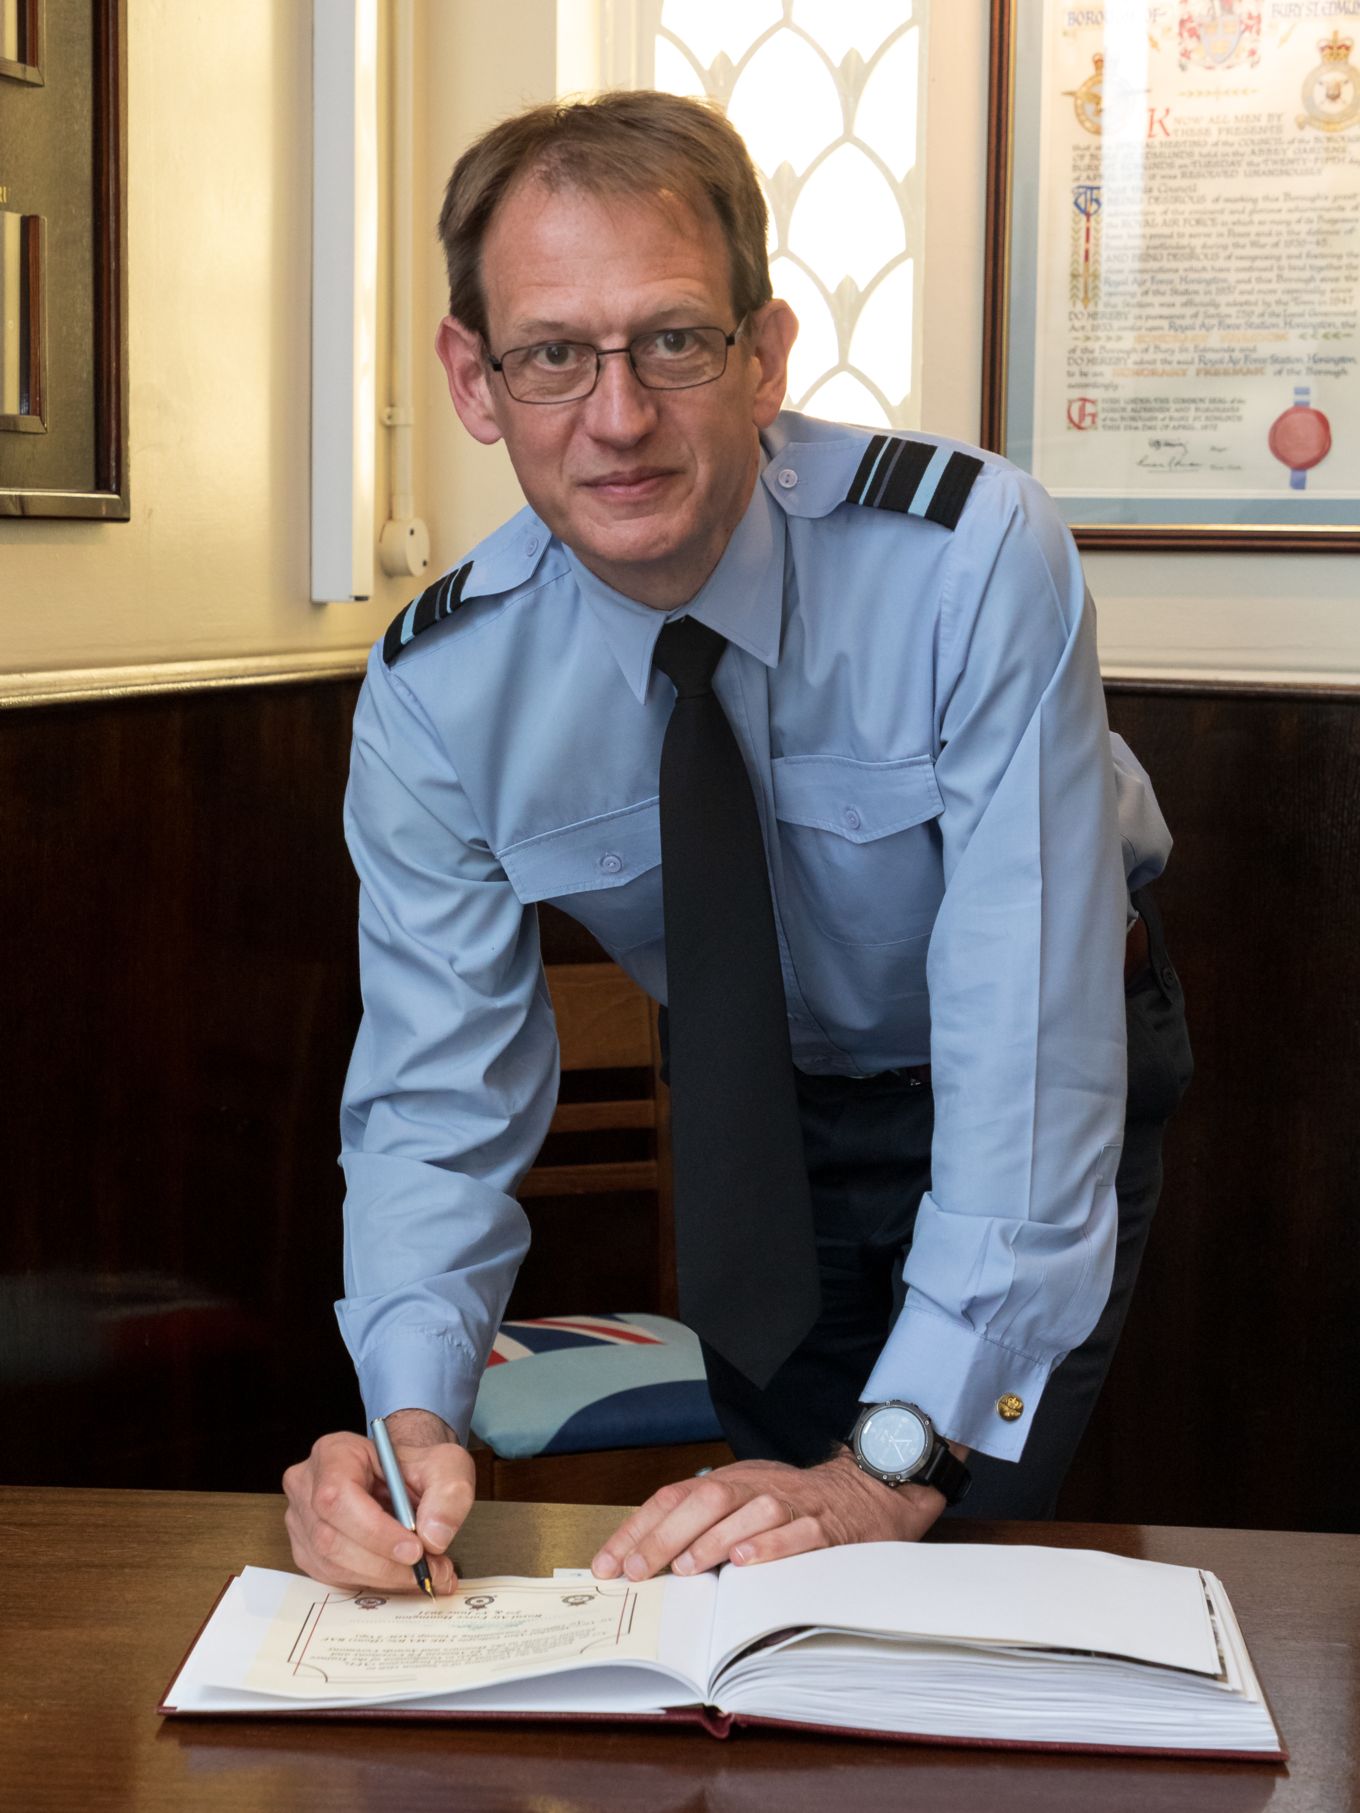 AOC 2 Gp Air Vice-Marshal Gillespie visits the Station for the Annual Formal Inspection